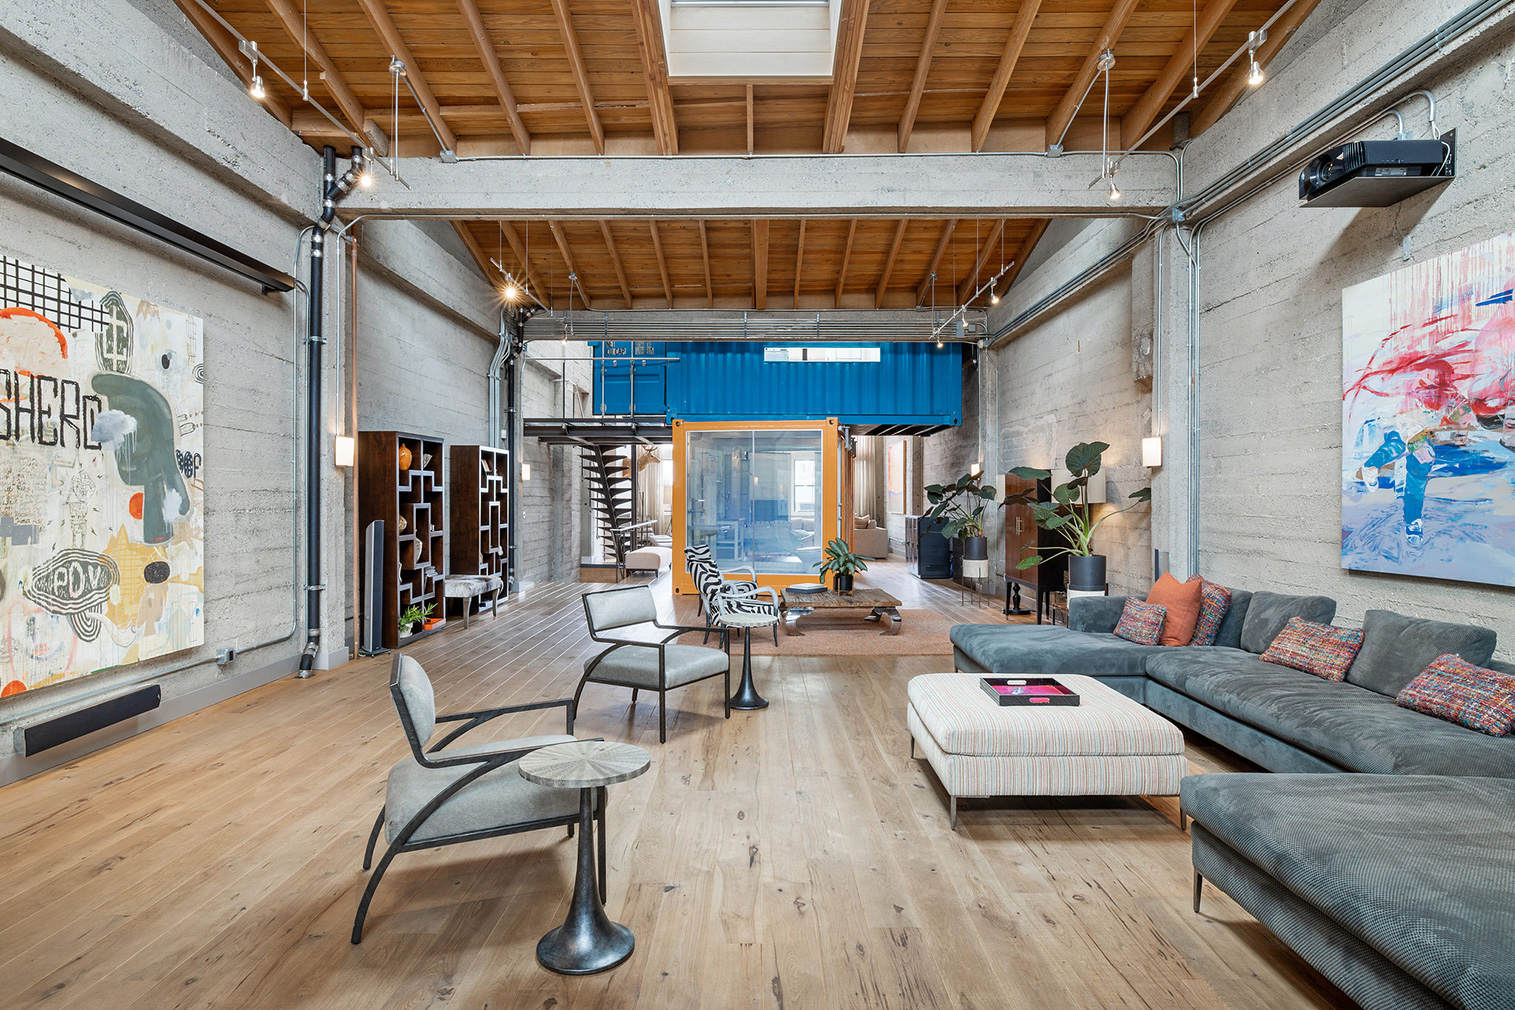 Stacked shipping containers sit inside this sprawling warehouse loft in San Francisco's Fillmore District, juxtaposing industrial brick bones with rugged steel.